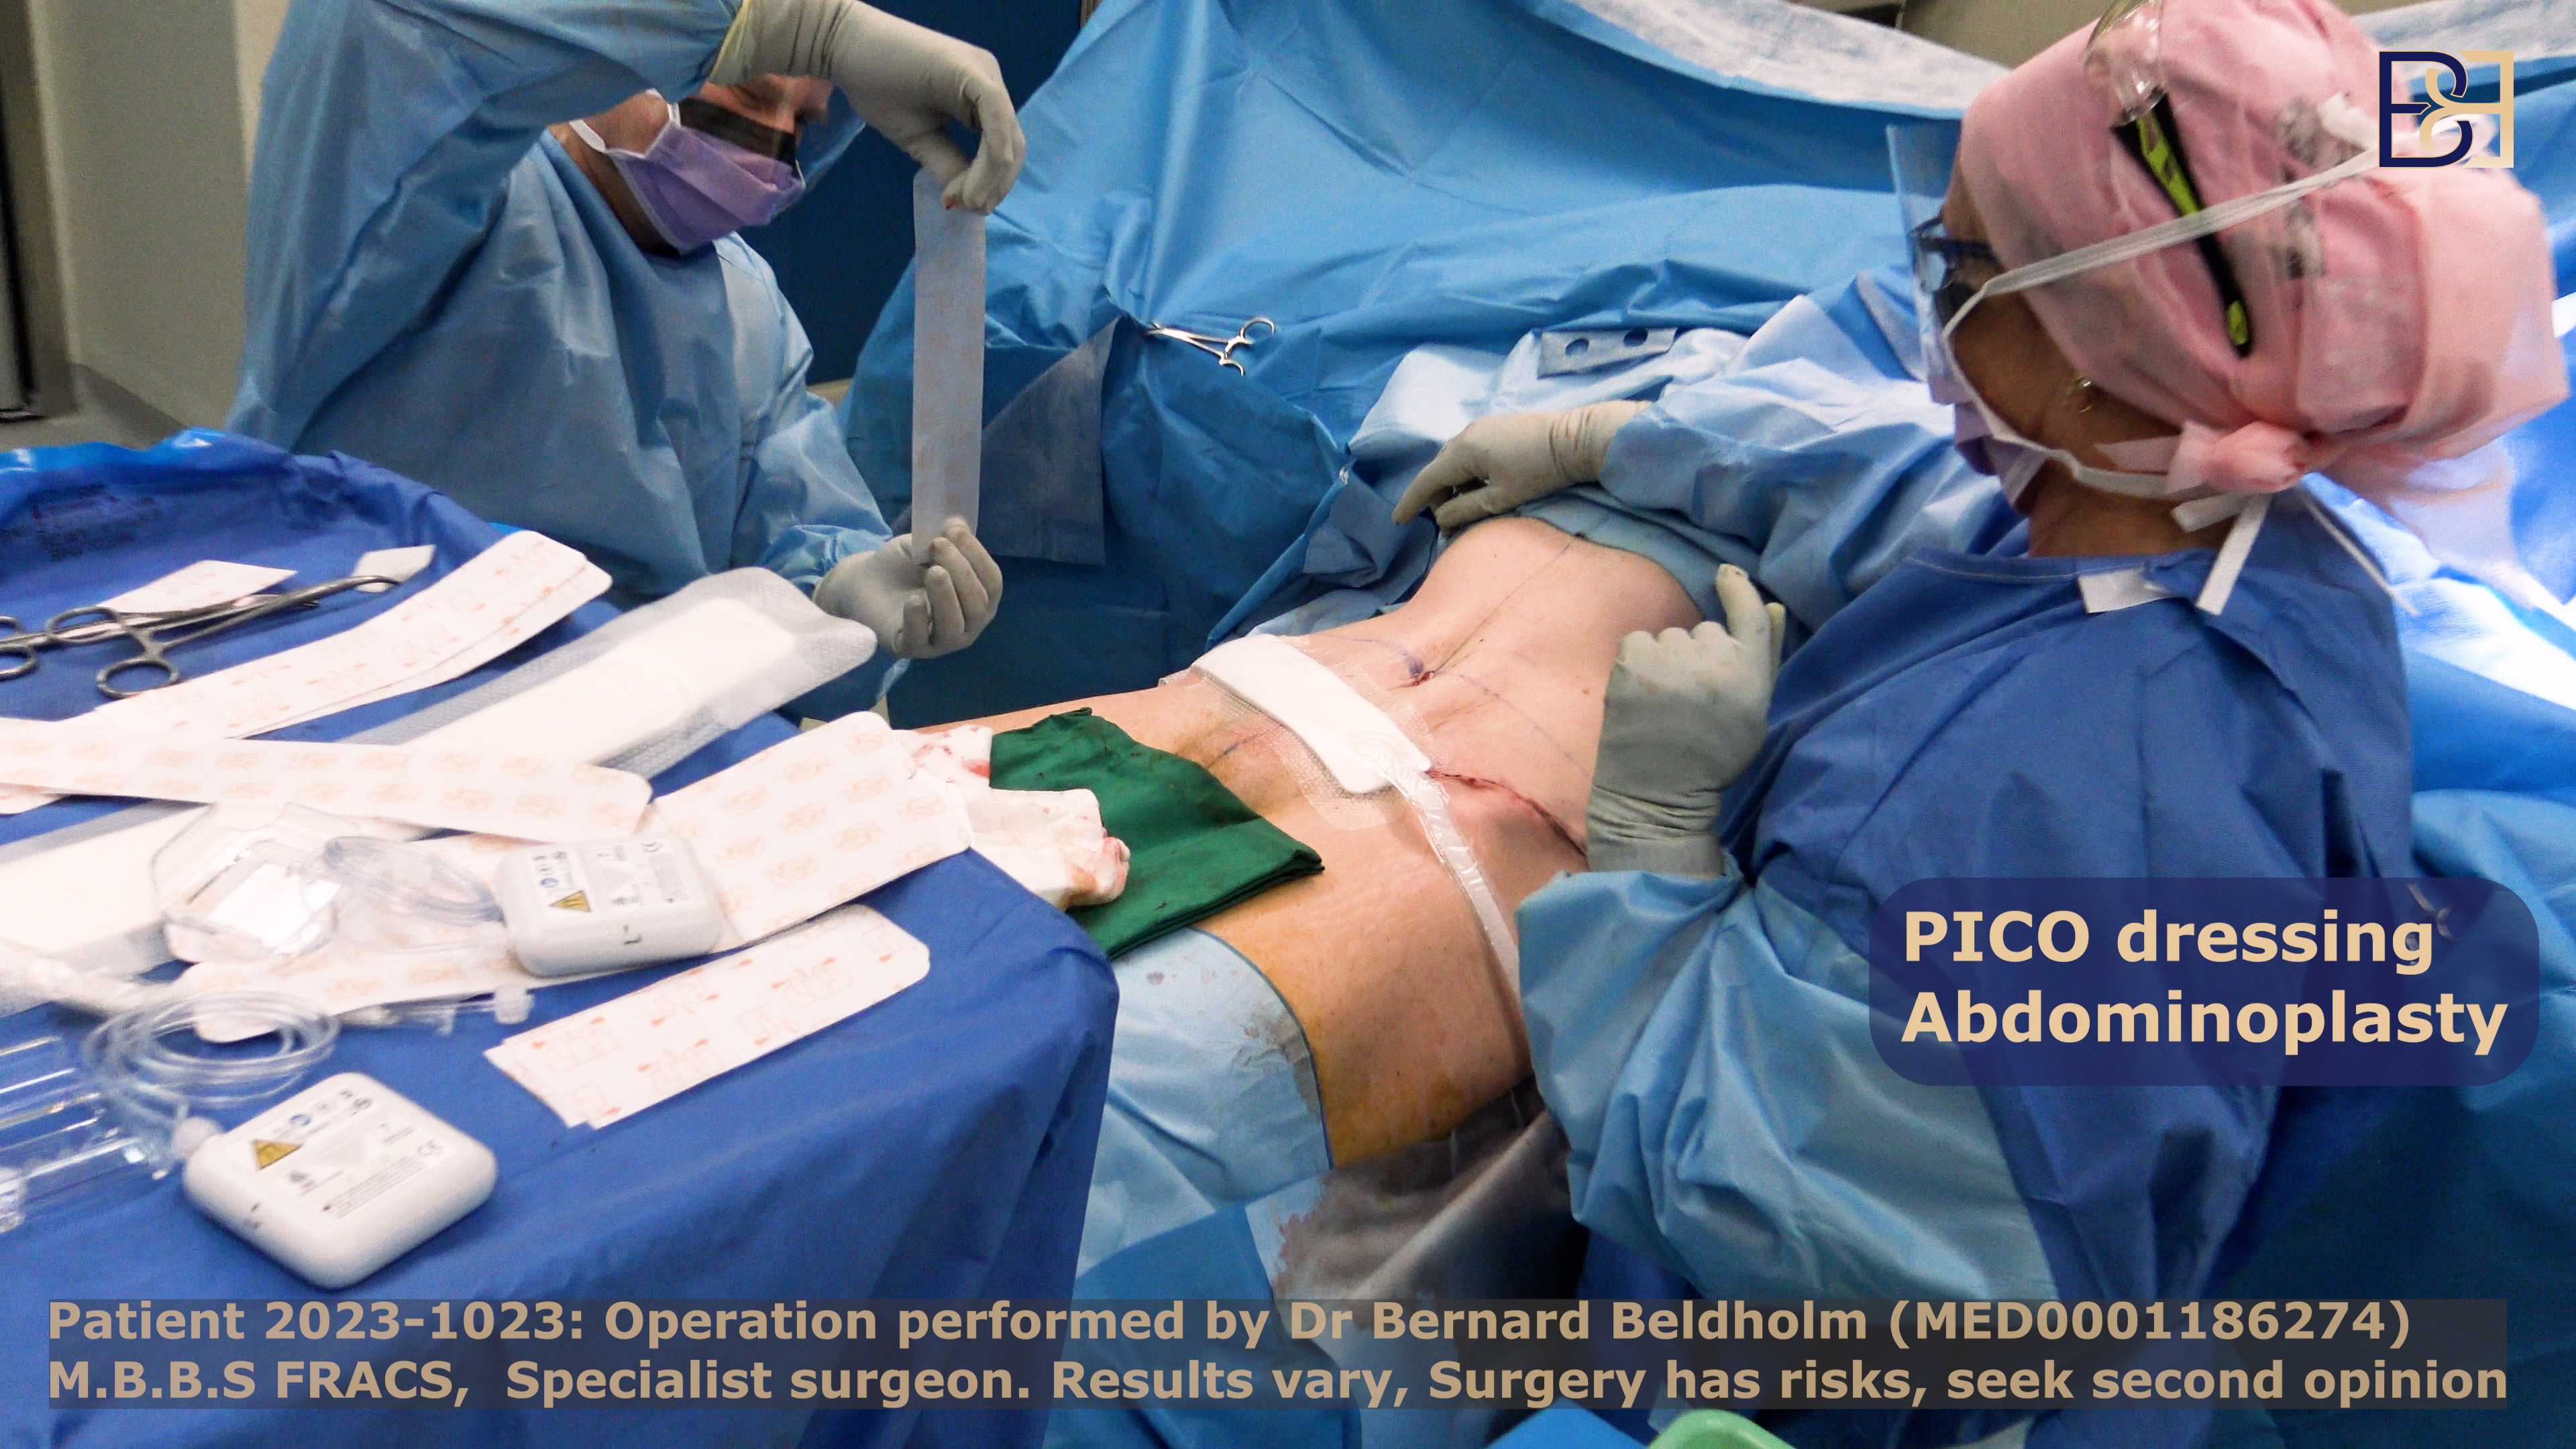 PICO dressing applied to abdominal wound by Dr Beldholm